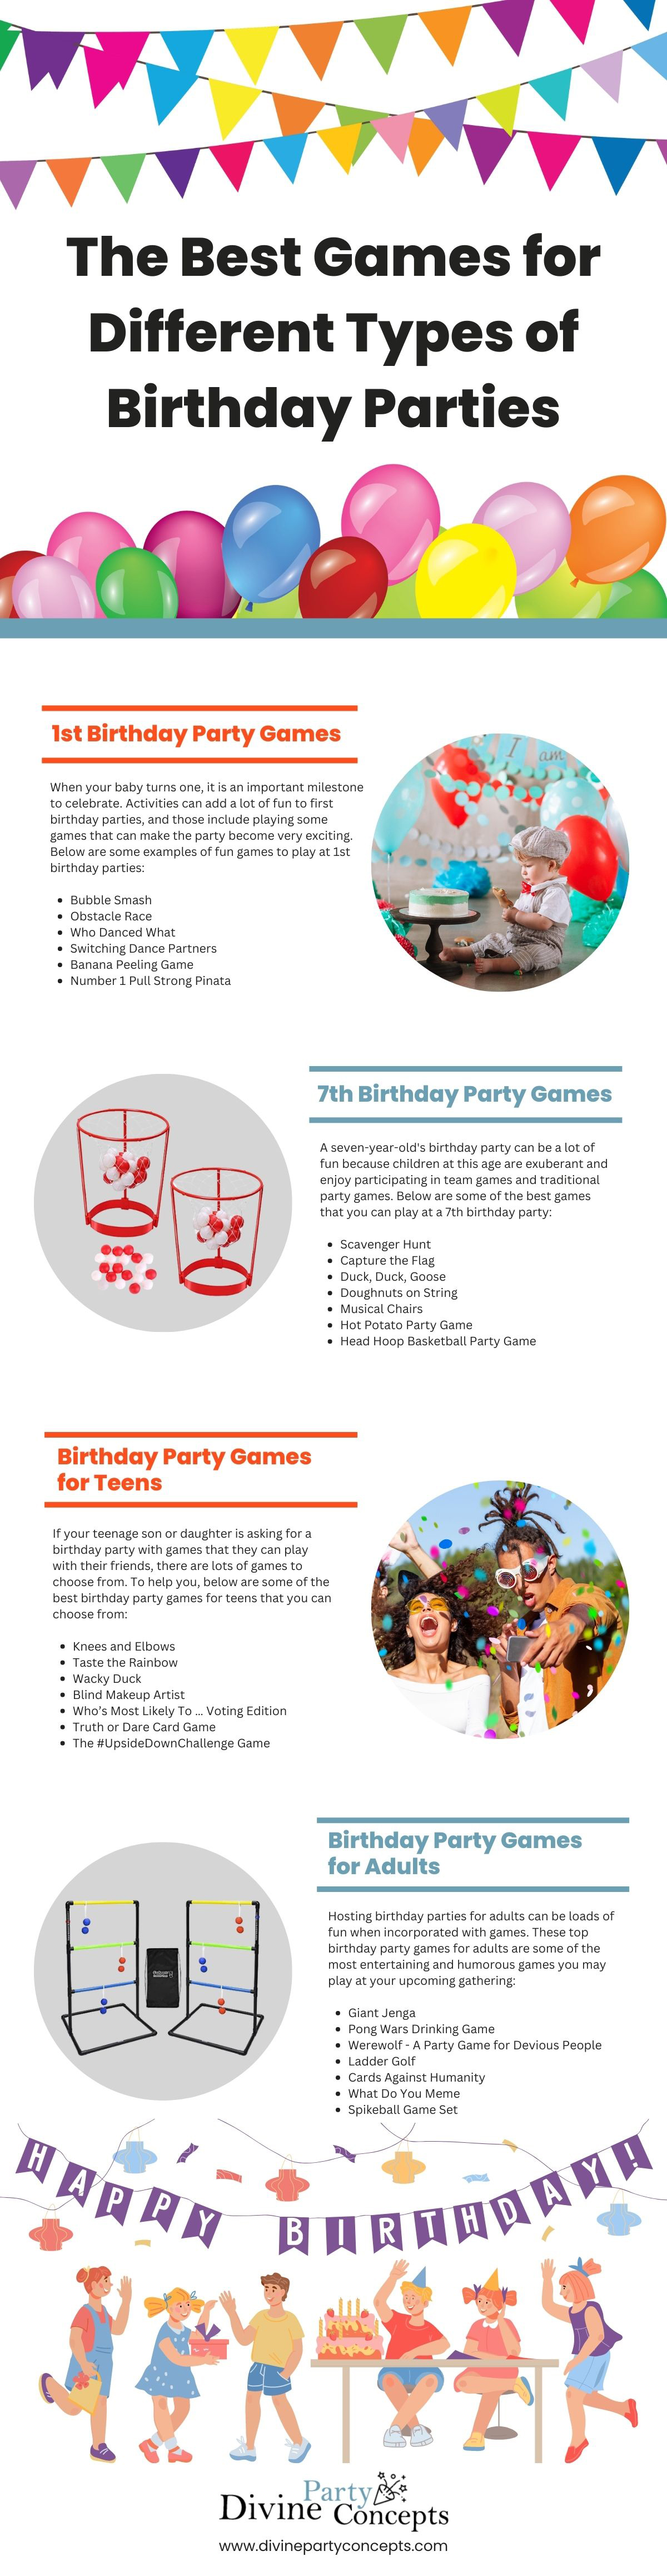 The Best Games for Different Types of Birthday Parties